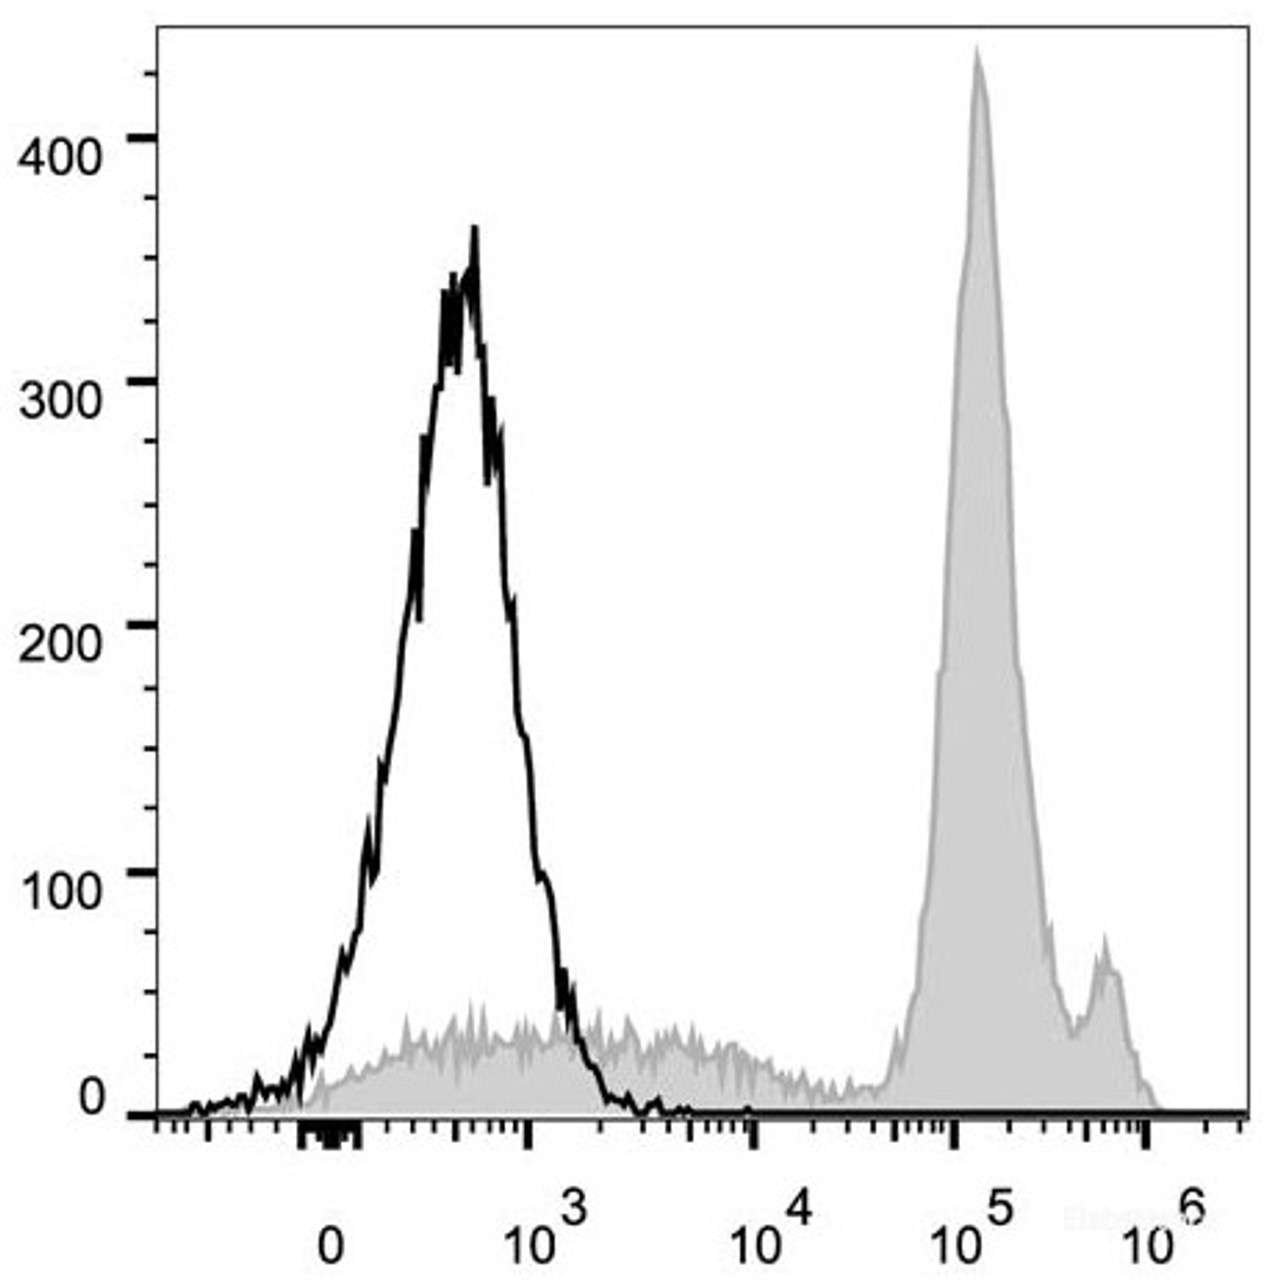 C57BL/6 murine bone marrow cells are stained with FITC Anti-Mouse Ly6C Antibody(filled gray histogram). Unstained bone marrow cells (empty black histogram) are used as control.